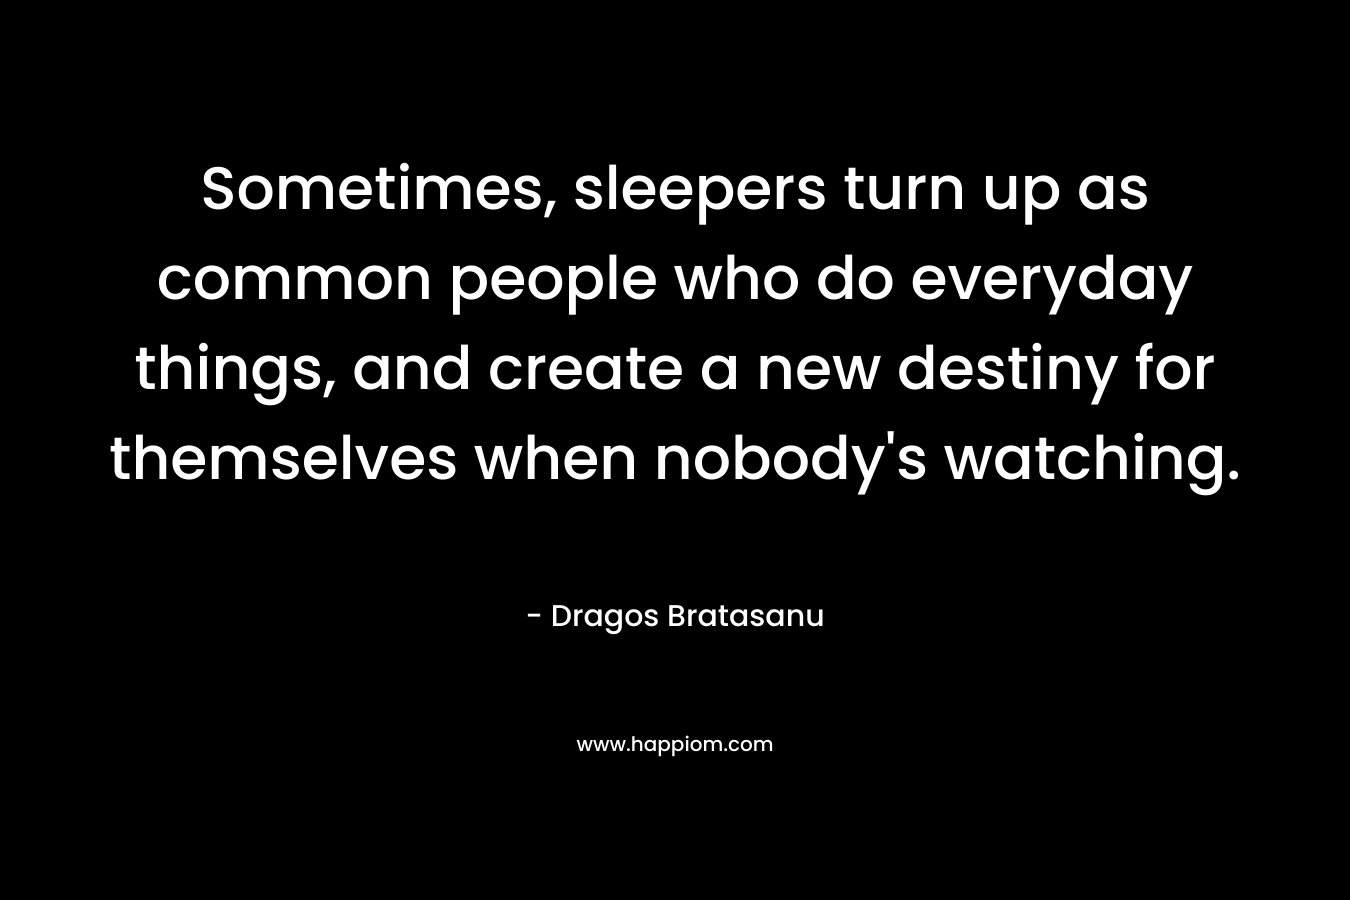 Sometimes, sleepers turn up as common people who do everyday things, and create a new destiny for themselves when nobody’s watching. – Dragos Bratasanu